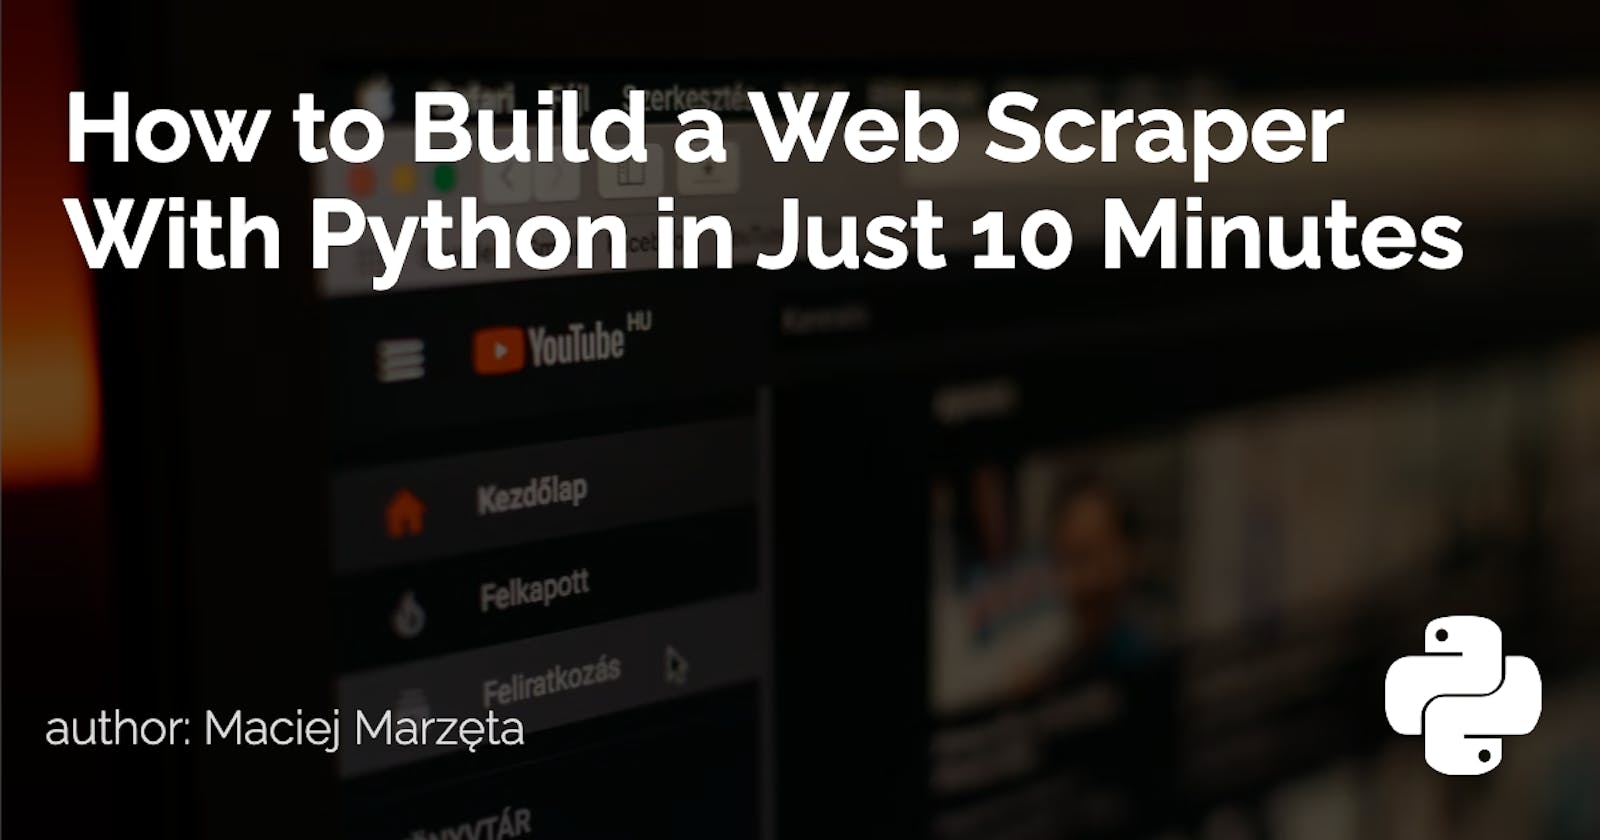 How to Build a Web Scraper With Python in Just 10 Minutes